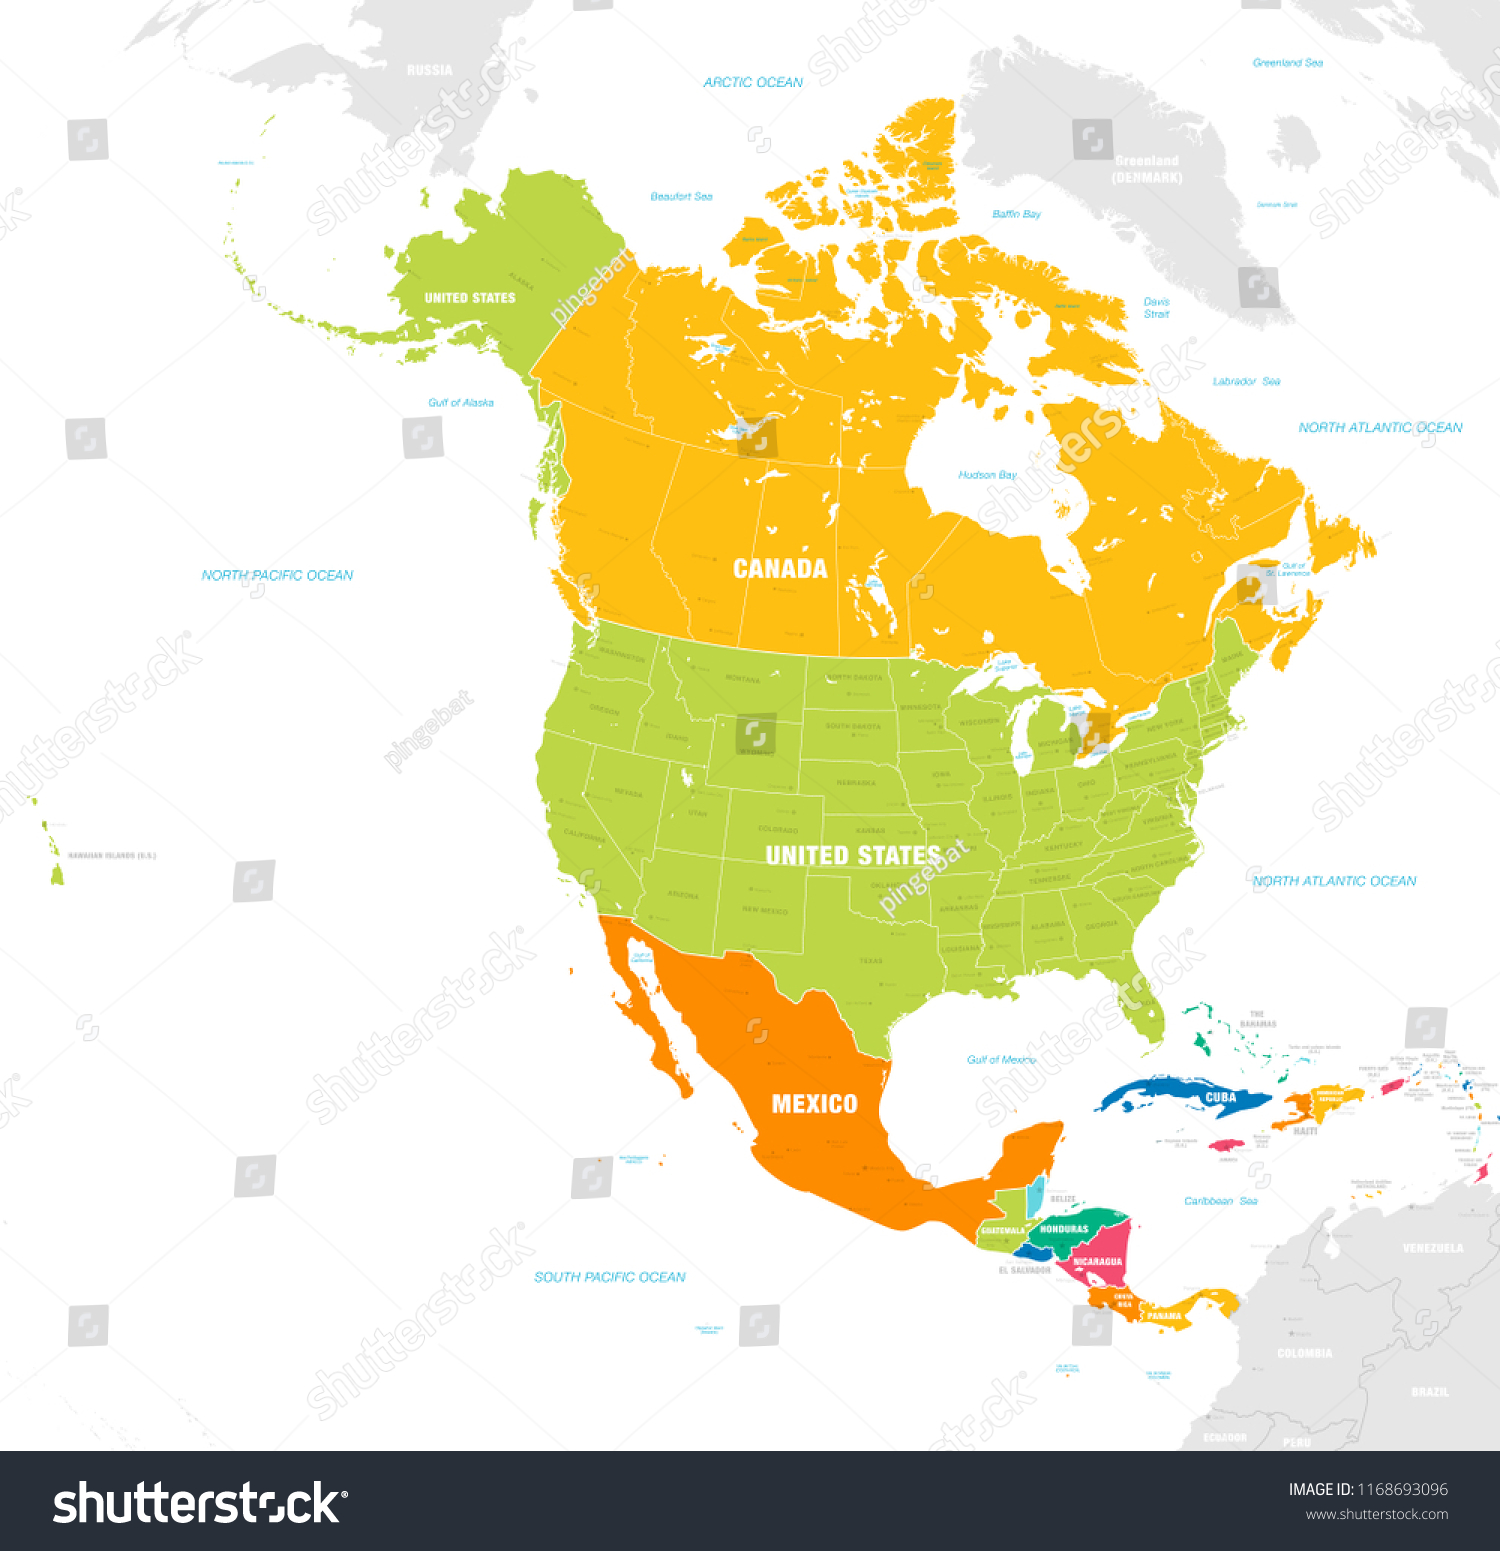 North America Maps - How Far Does North America Extend?